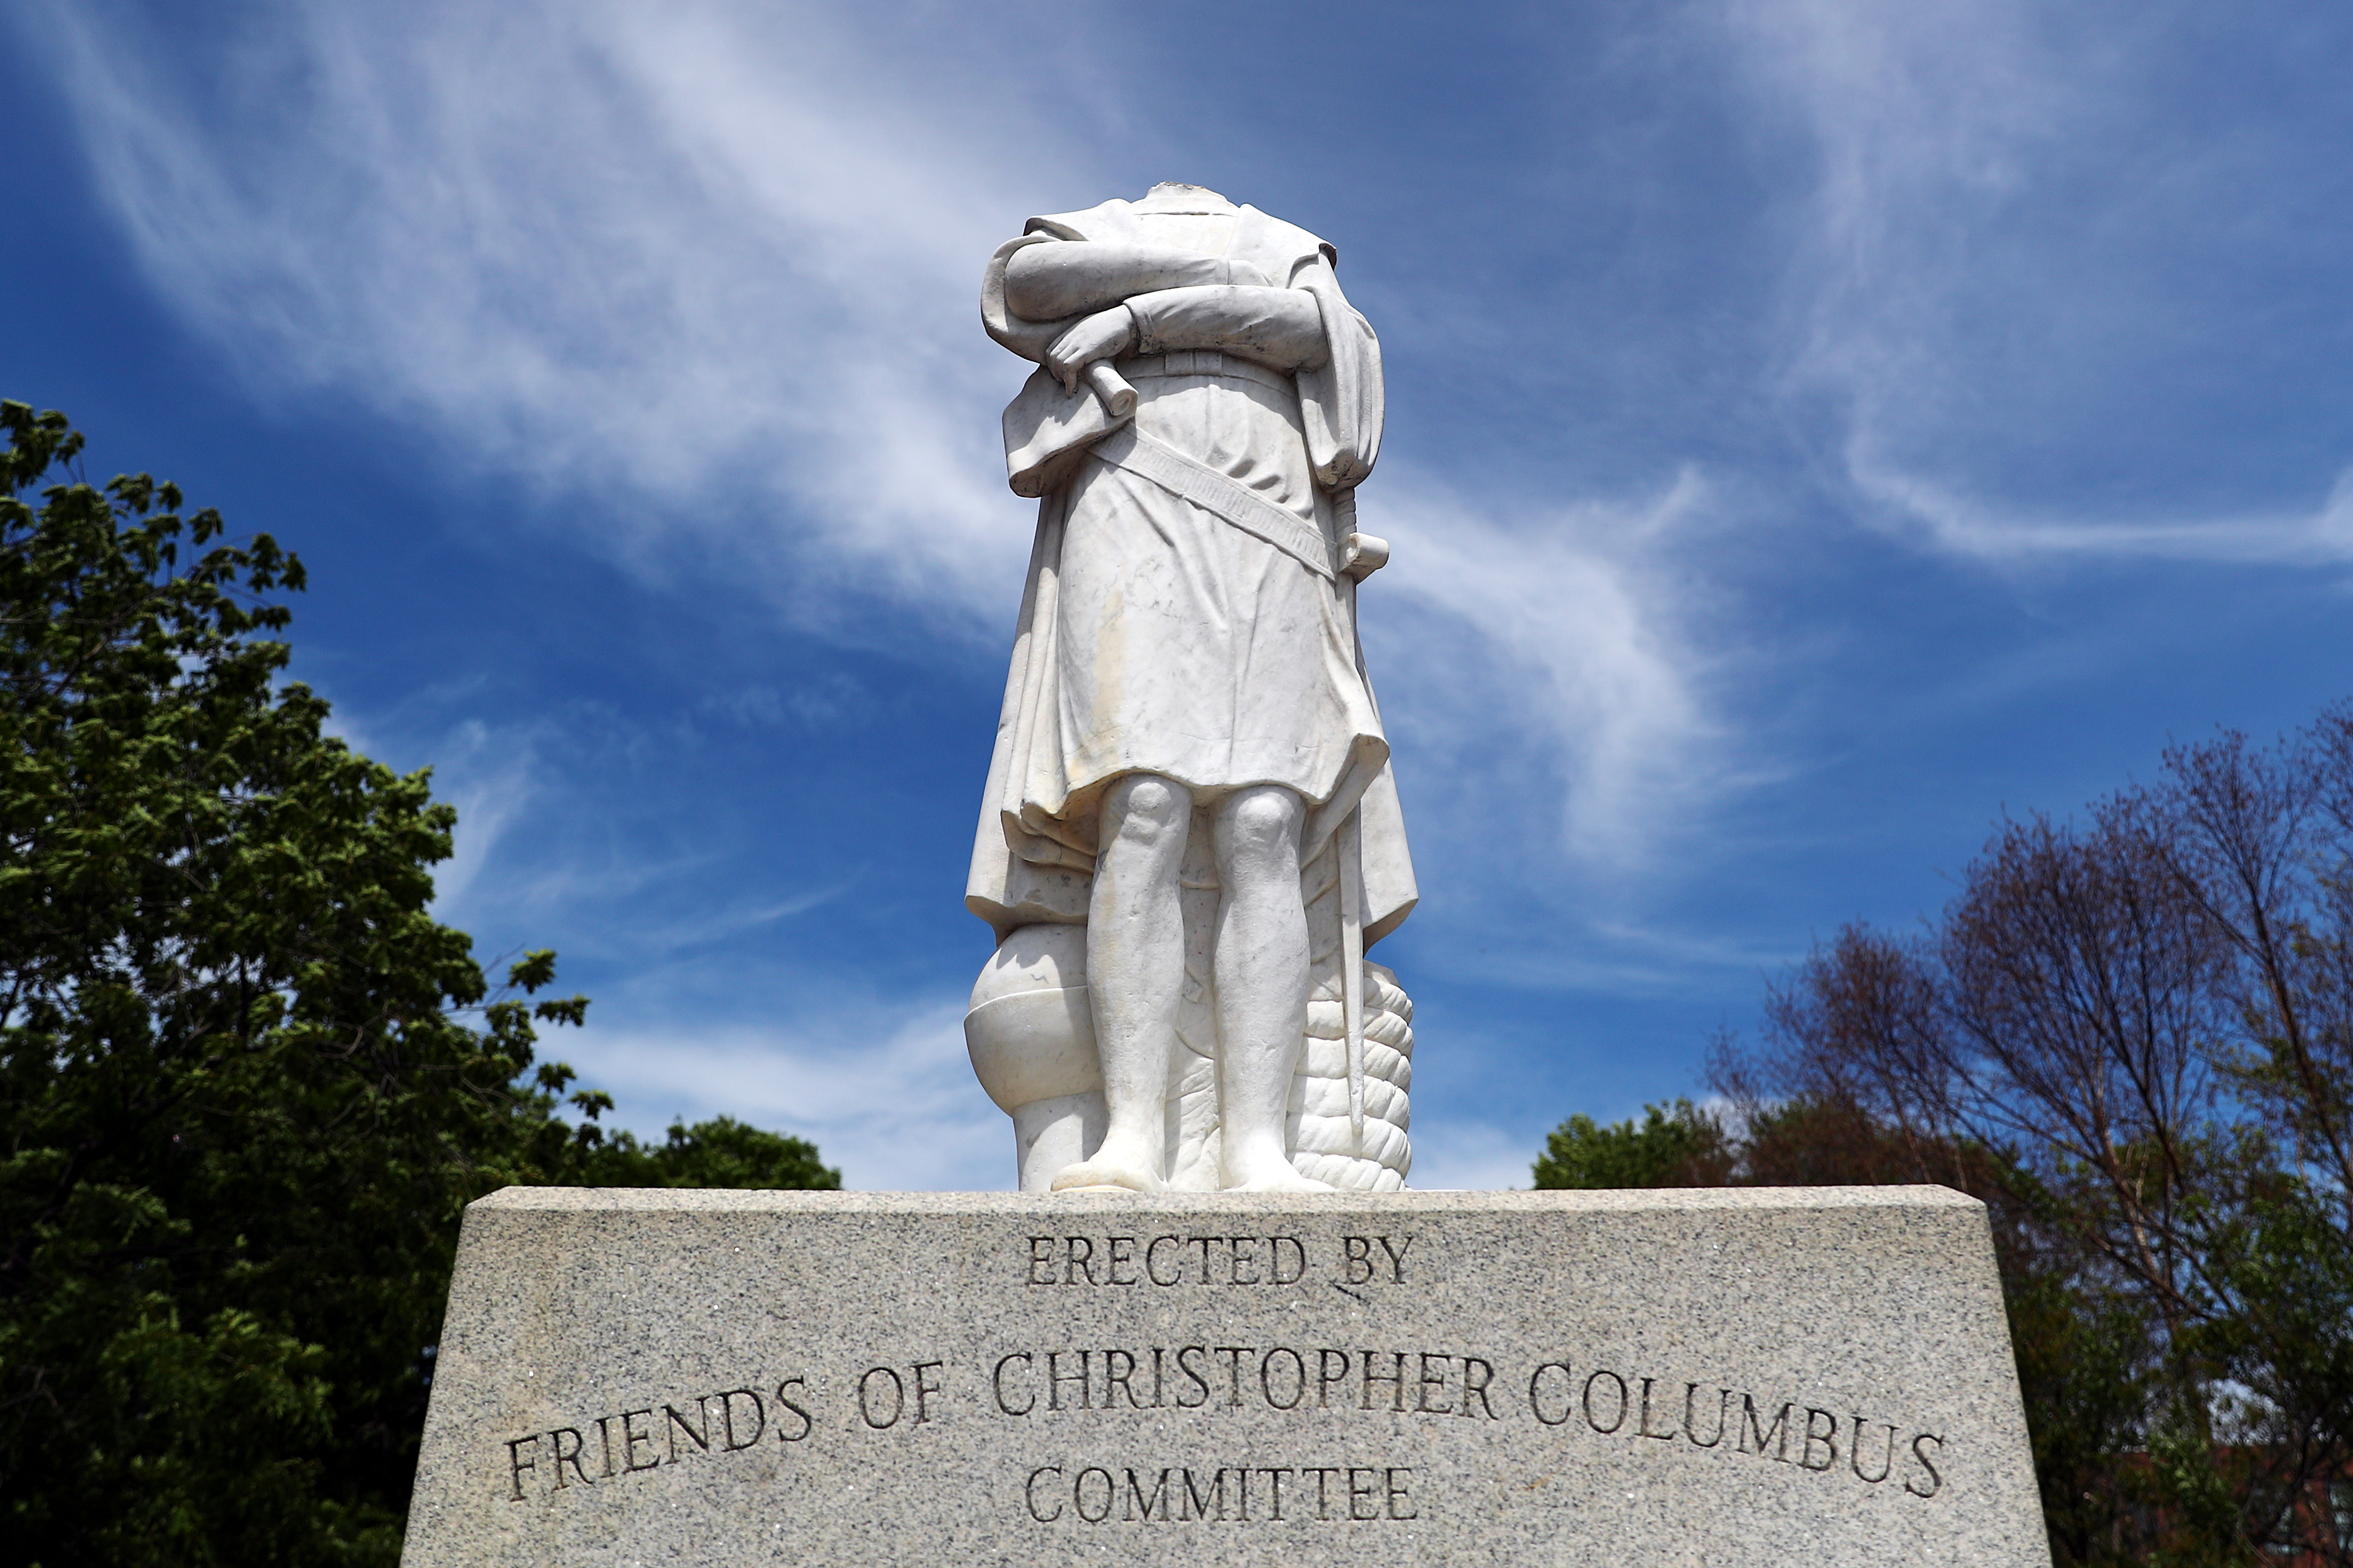 A statue depicting Christopher Columbus is seen with its head removed at Christopher Columbus Waterfront Park on June 10, 2020 in Boston, Massachusetts. The statue was beheaded overnight and is scheduled to be removed by the City of Boston. (Photo by Tim Bradbury/Getty Images)